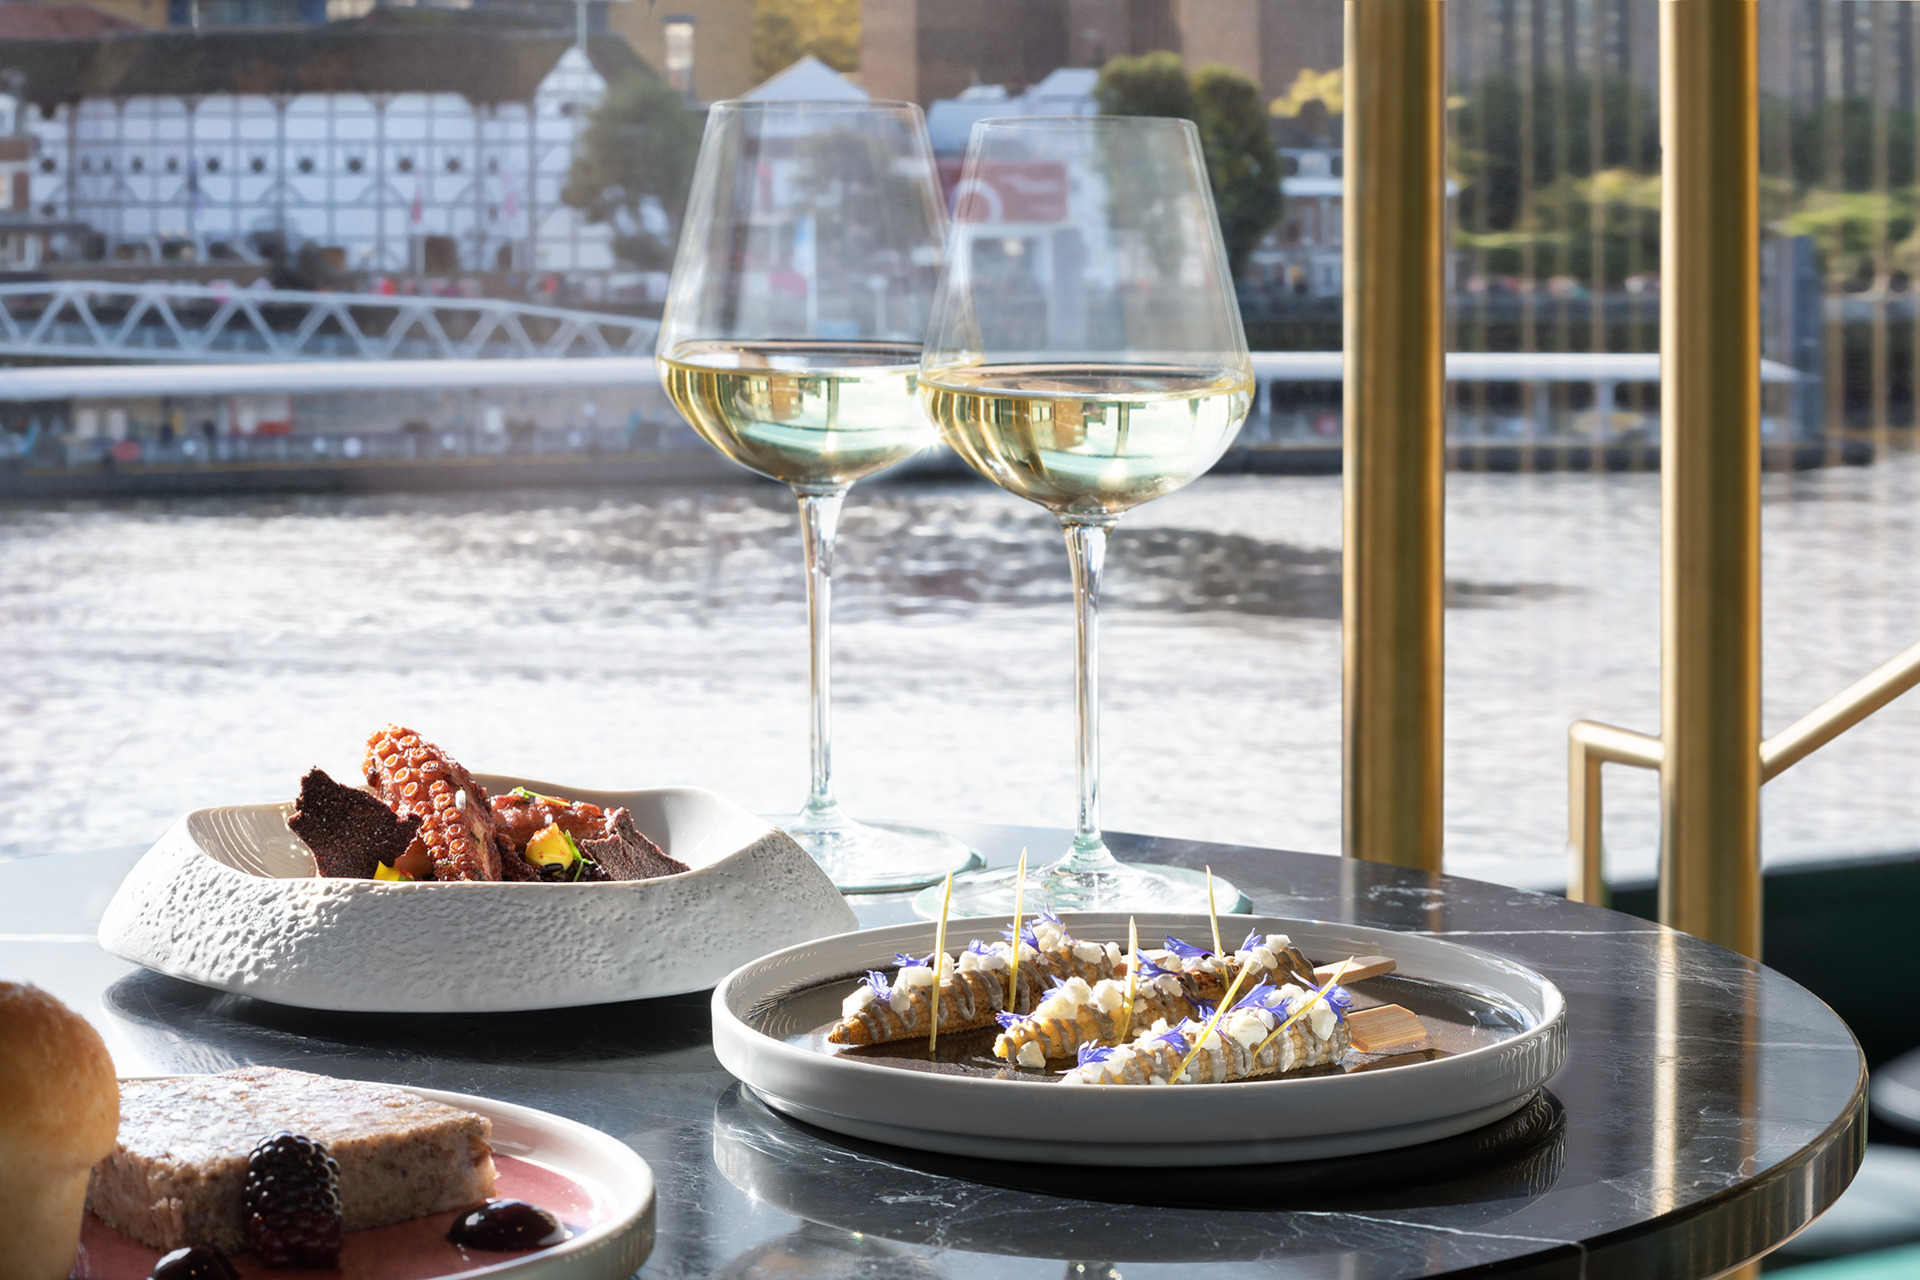 Table overlooking the Thames, with wine and plates of food